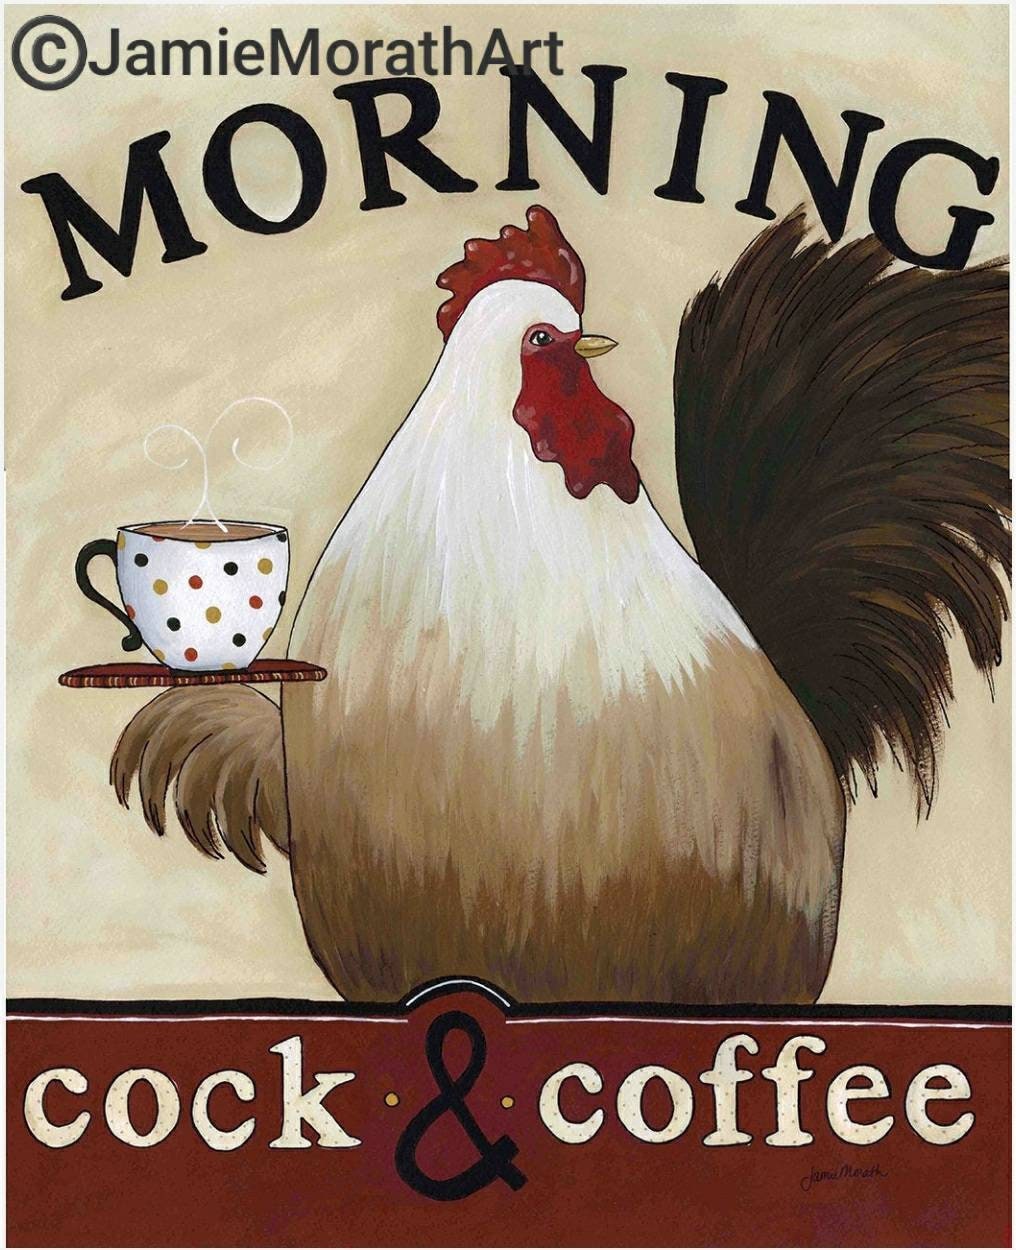 Morning Cock and Coffee, art print